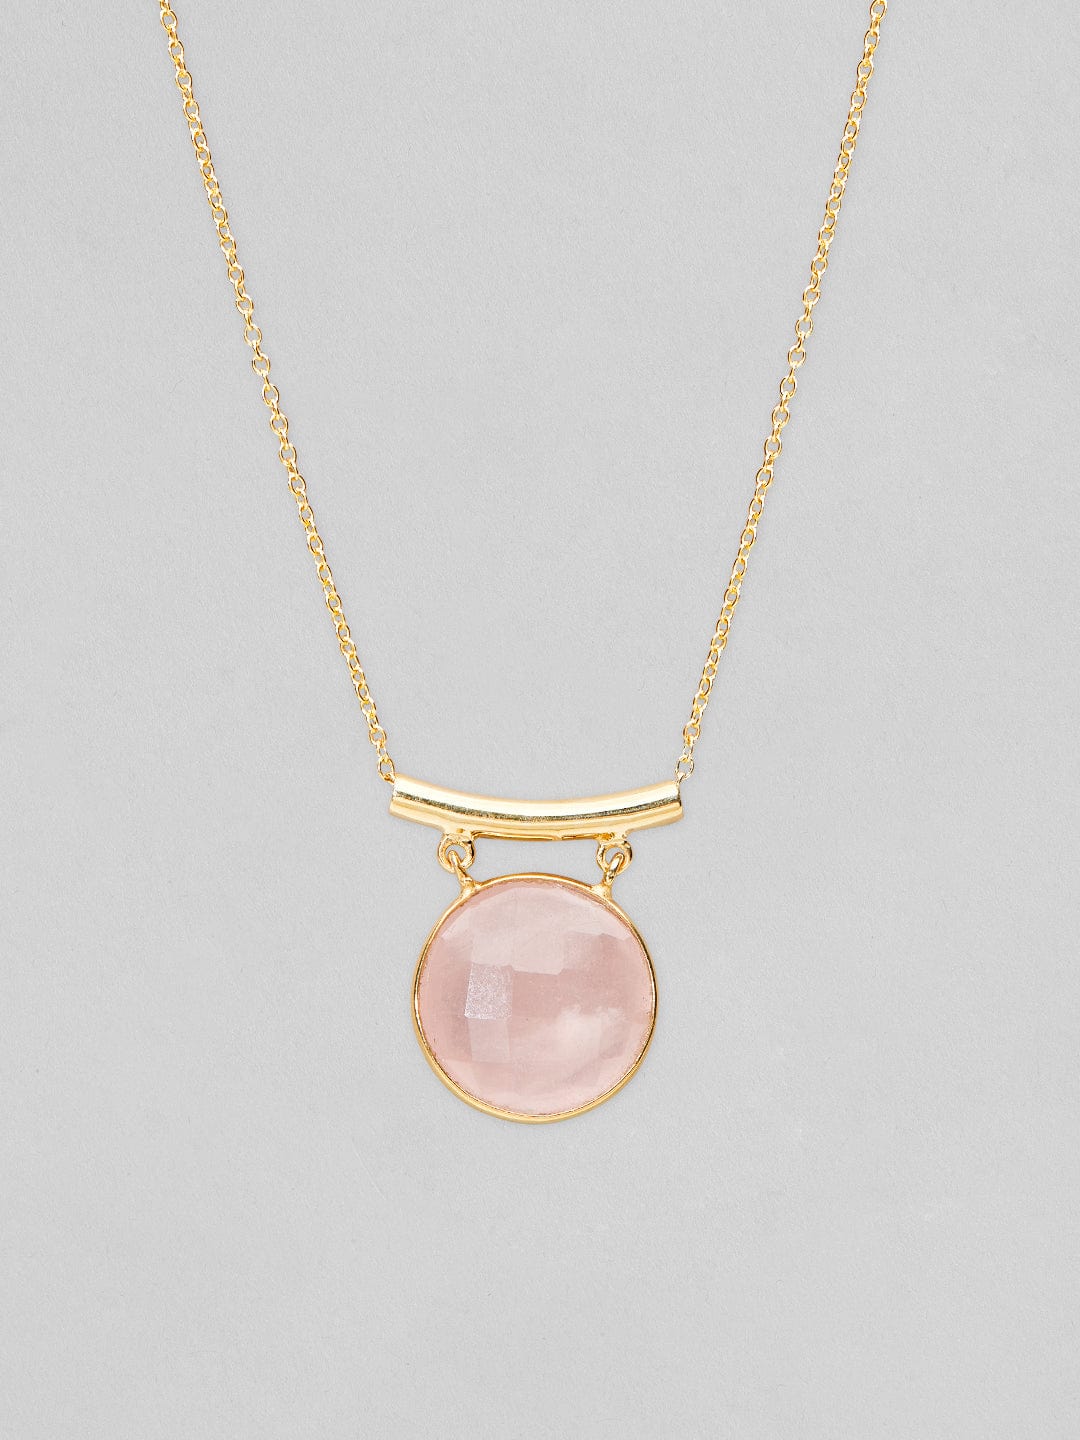 Rubans 925 Silver Pastel Touch Celestial Curve Pendant Necklace - Gold Plated Chain &amp; Necklaces